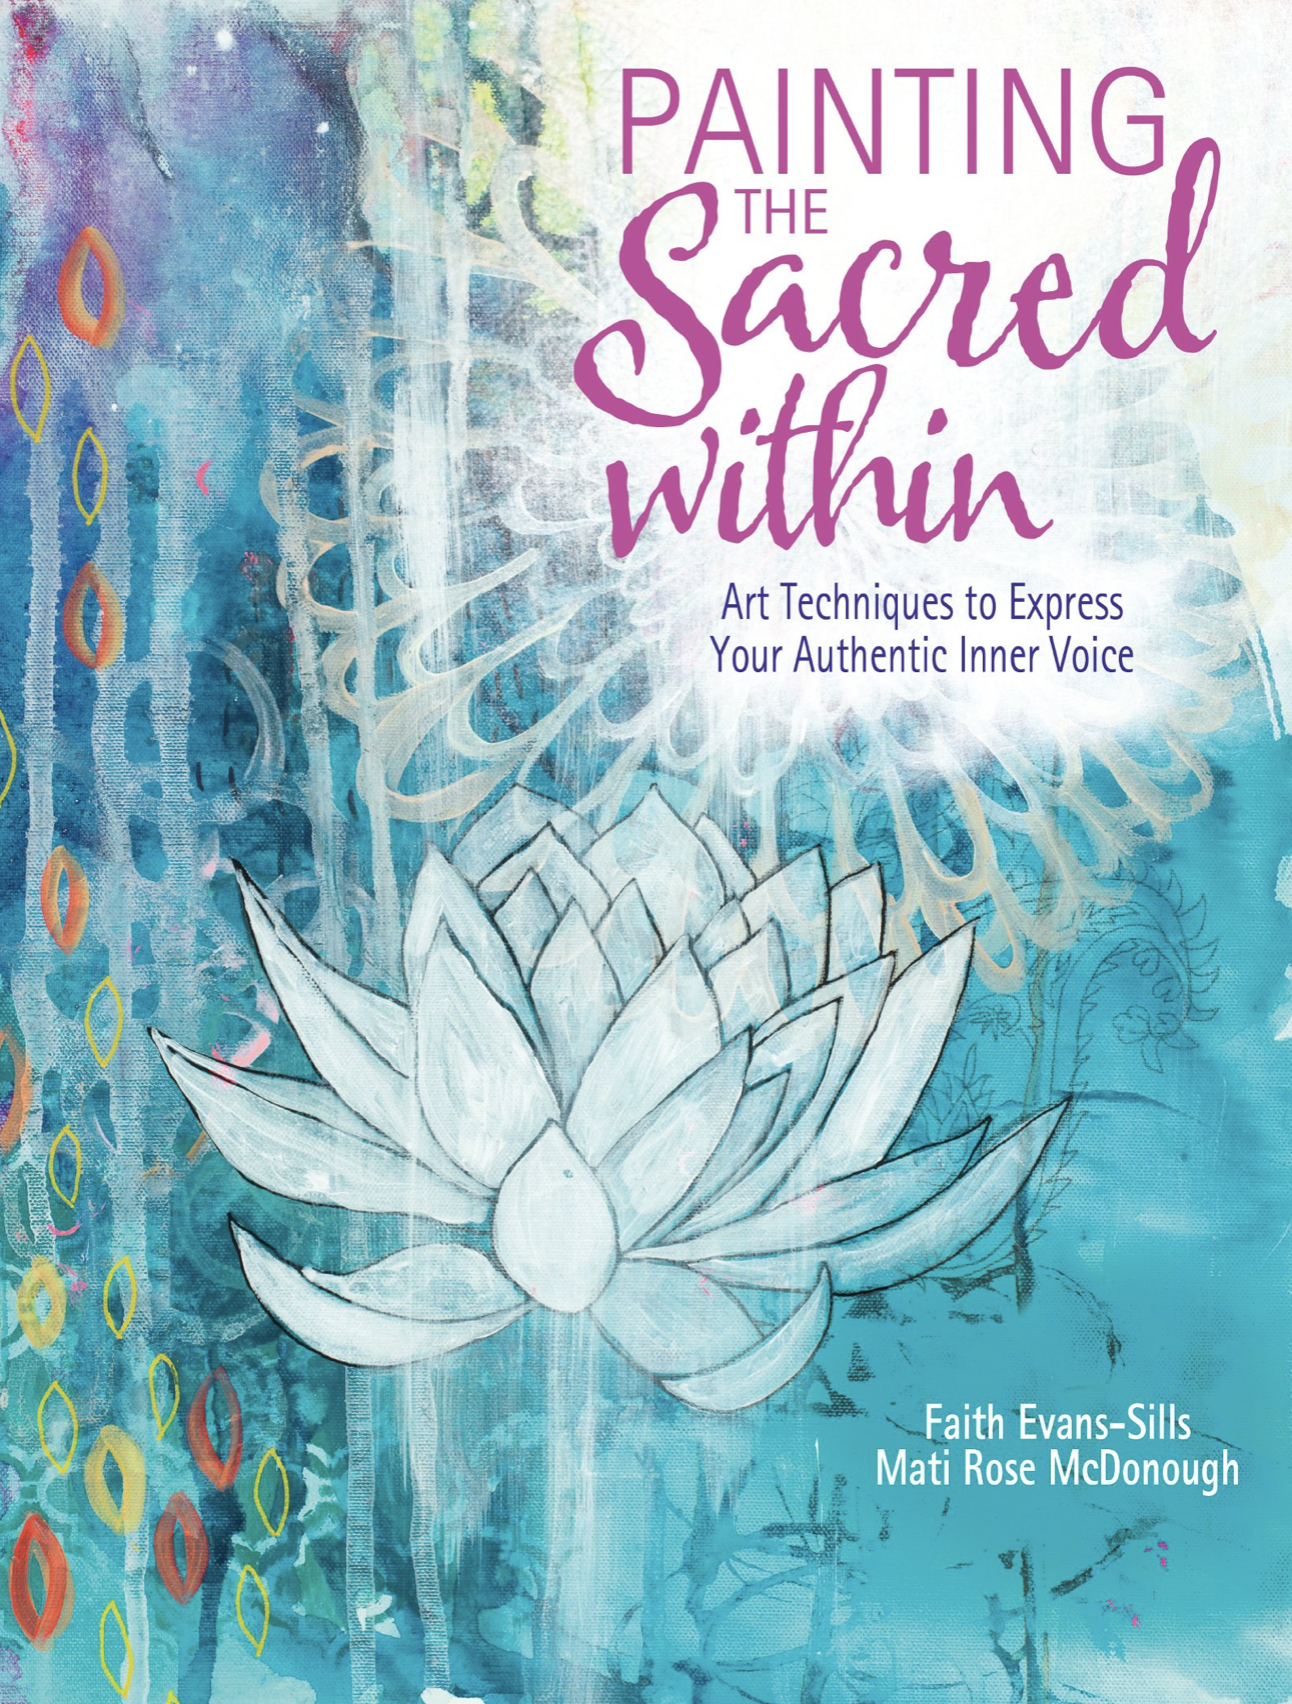 'Painting the Sacred Within' Book. Artist Feature